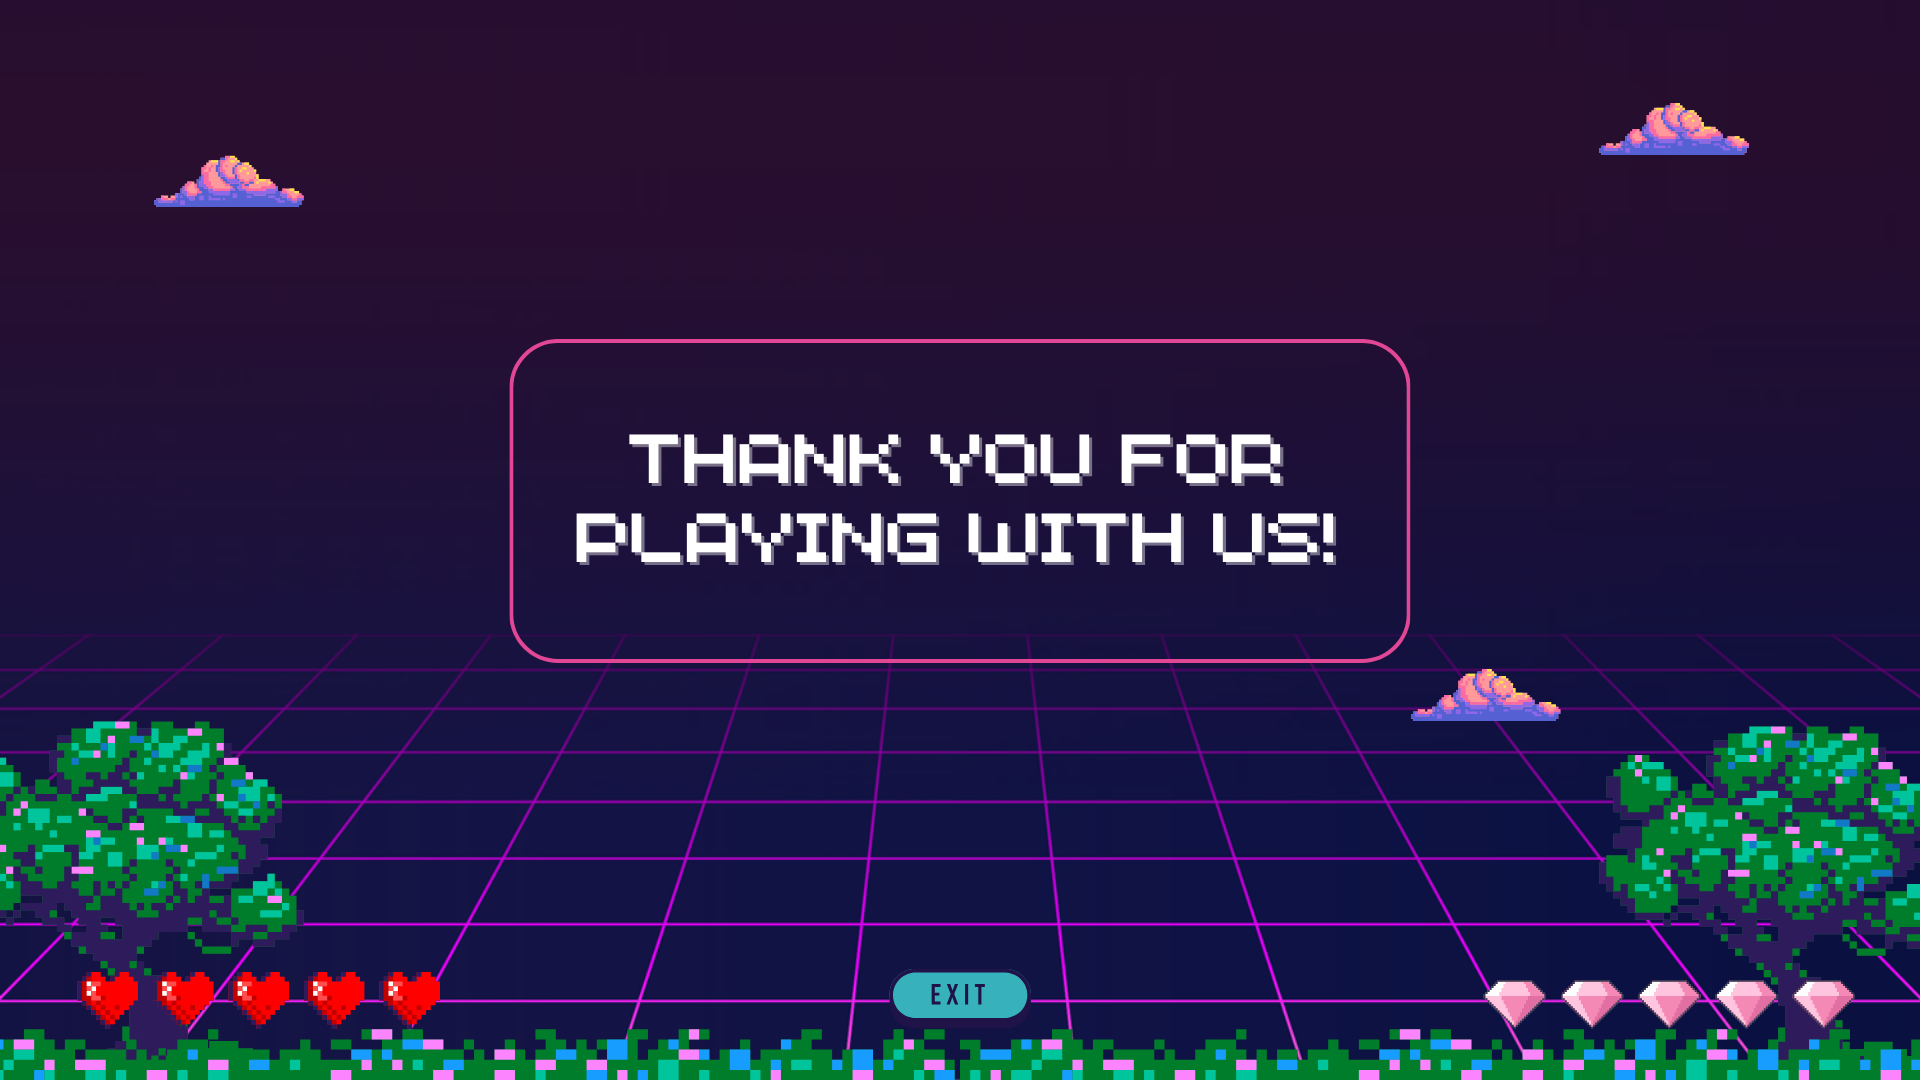 Thanks for playing with us